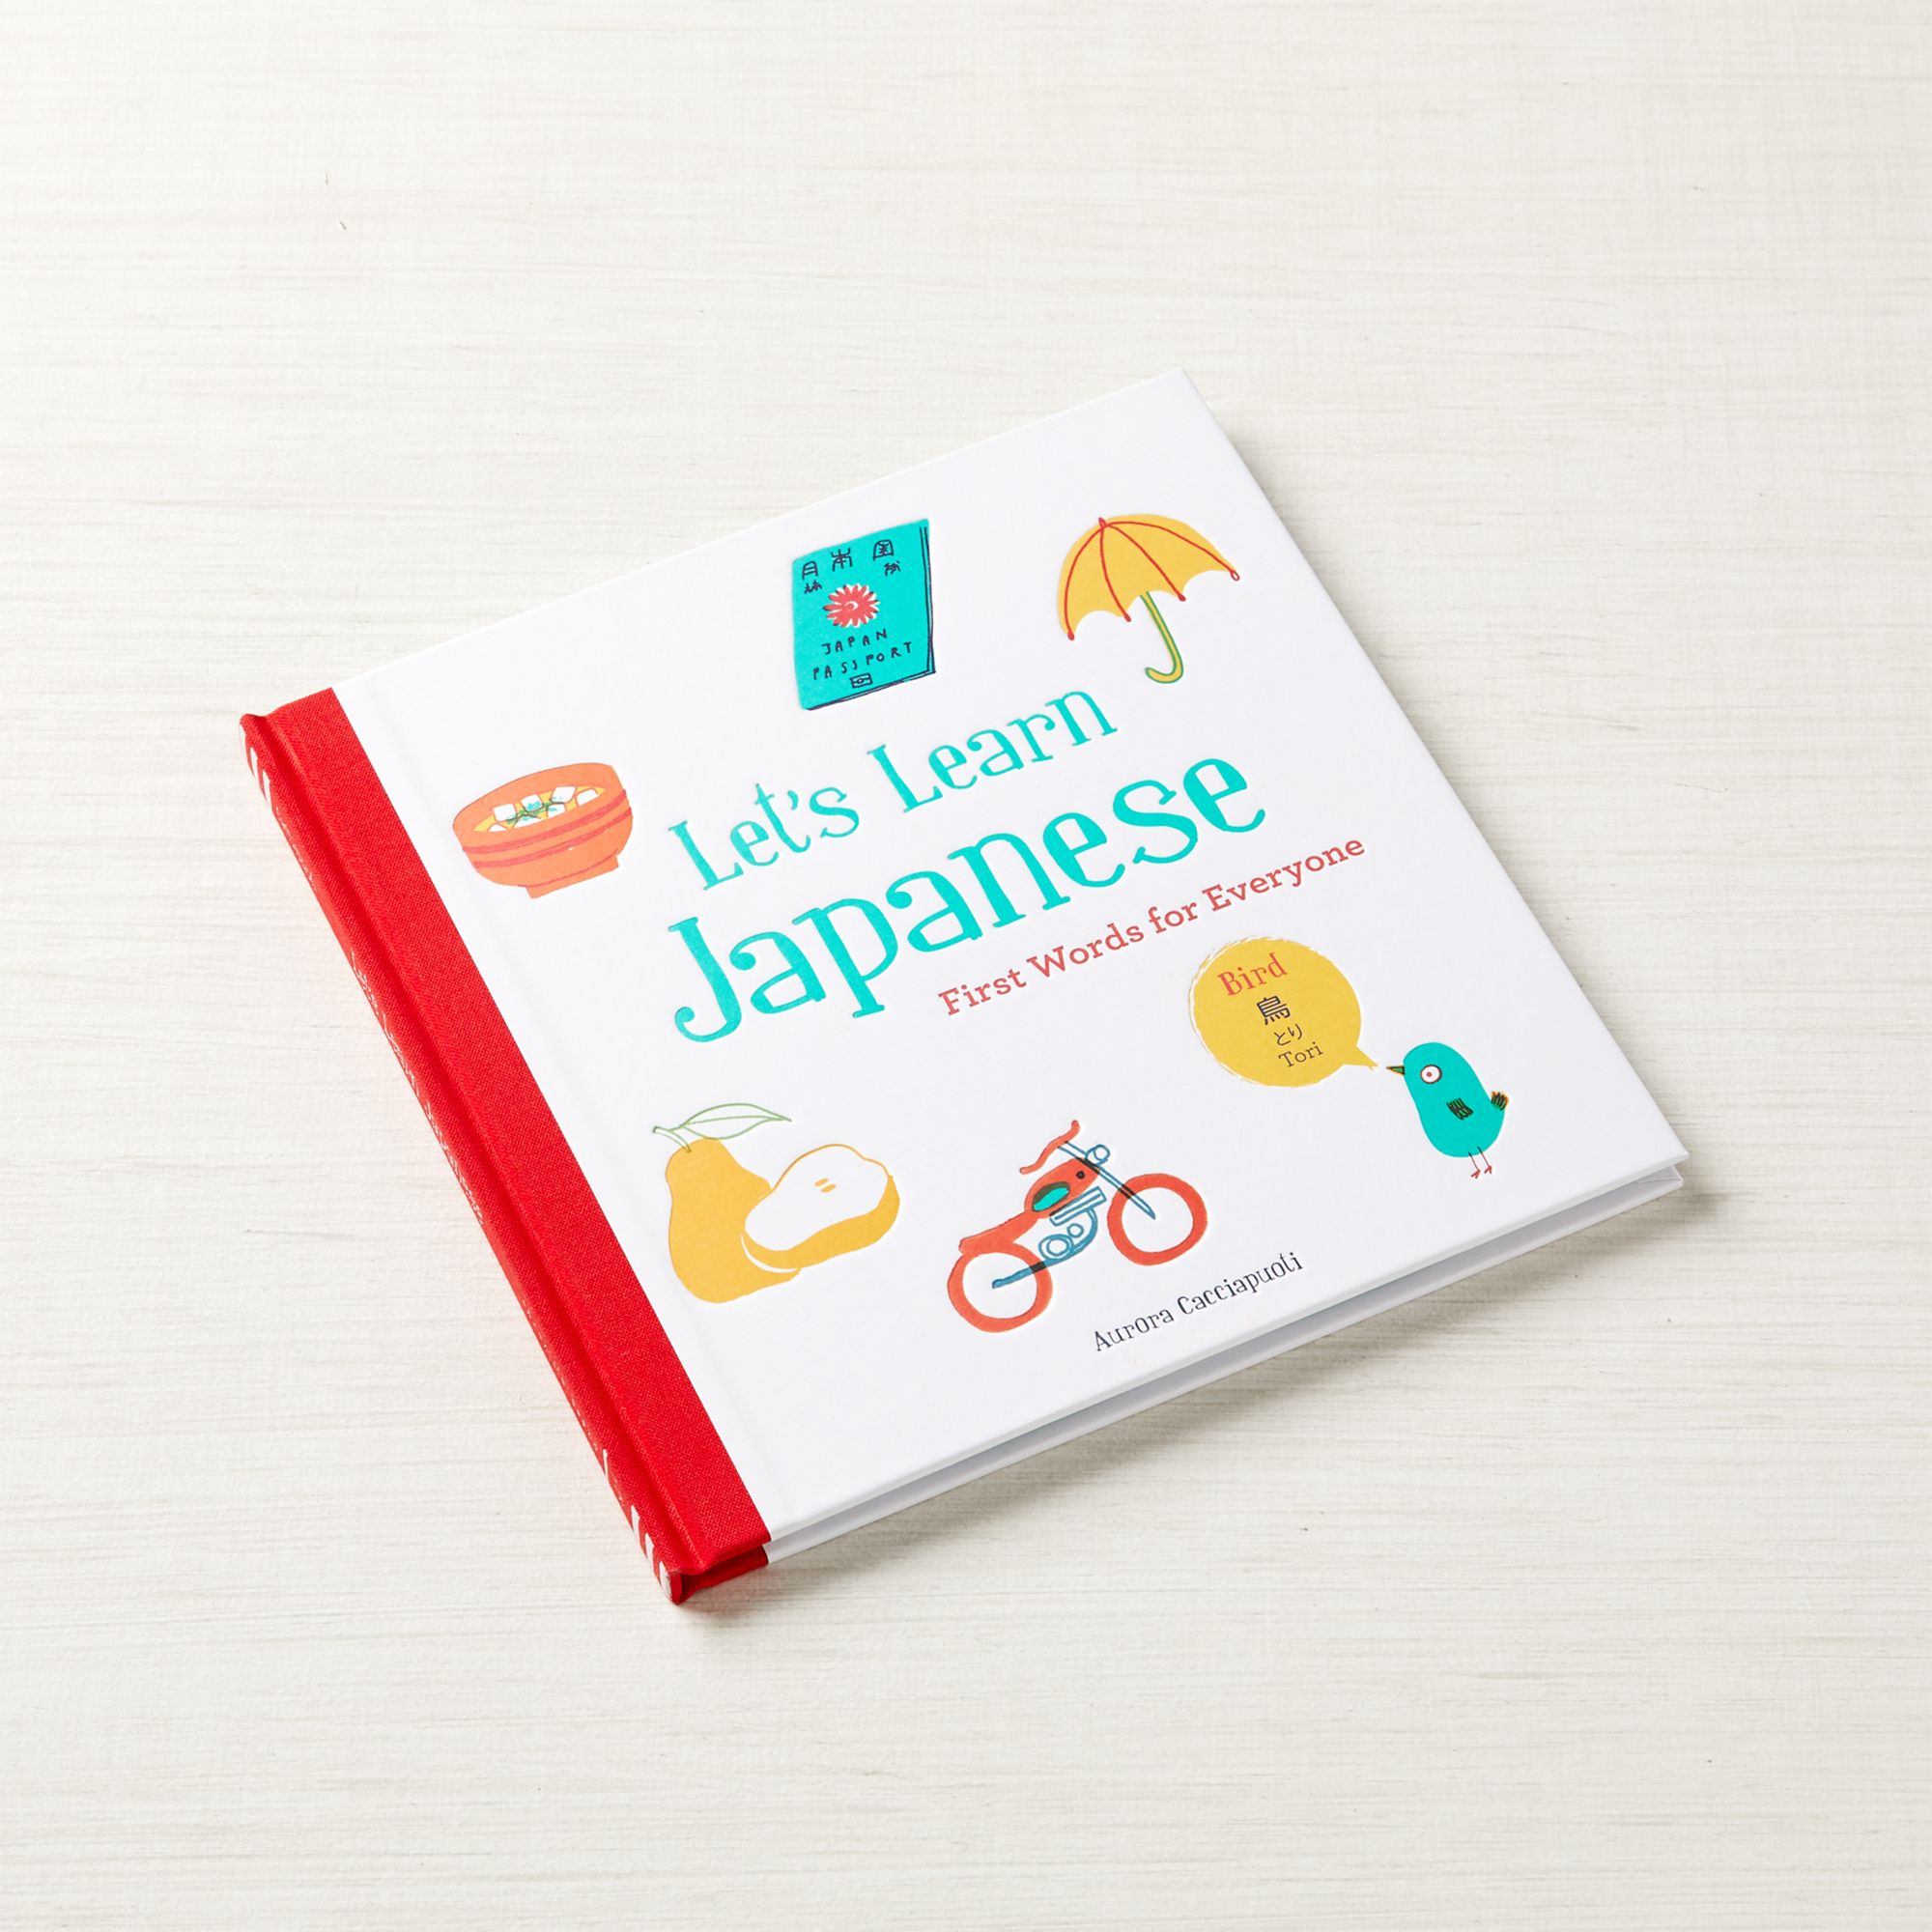 Let's learn Japanese